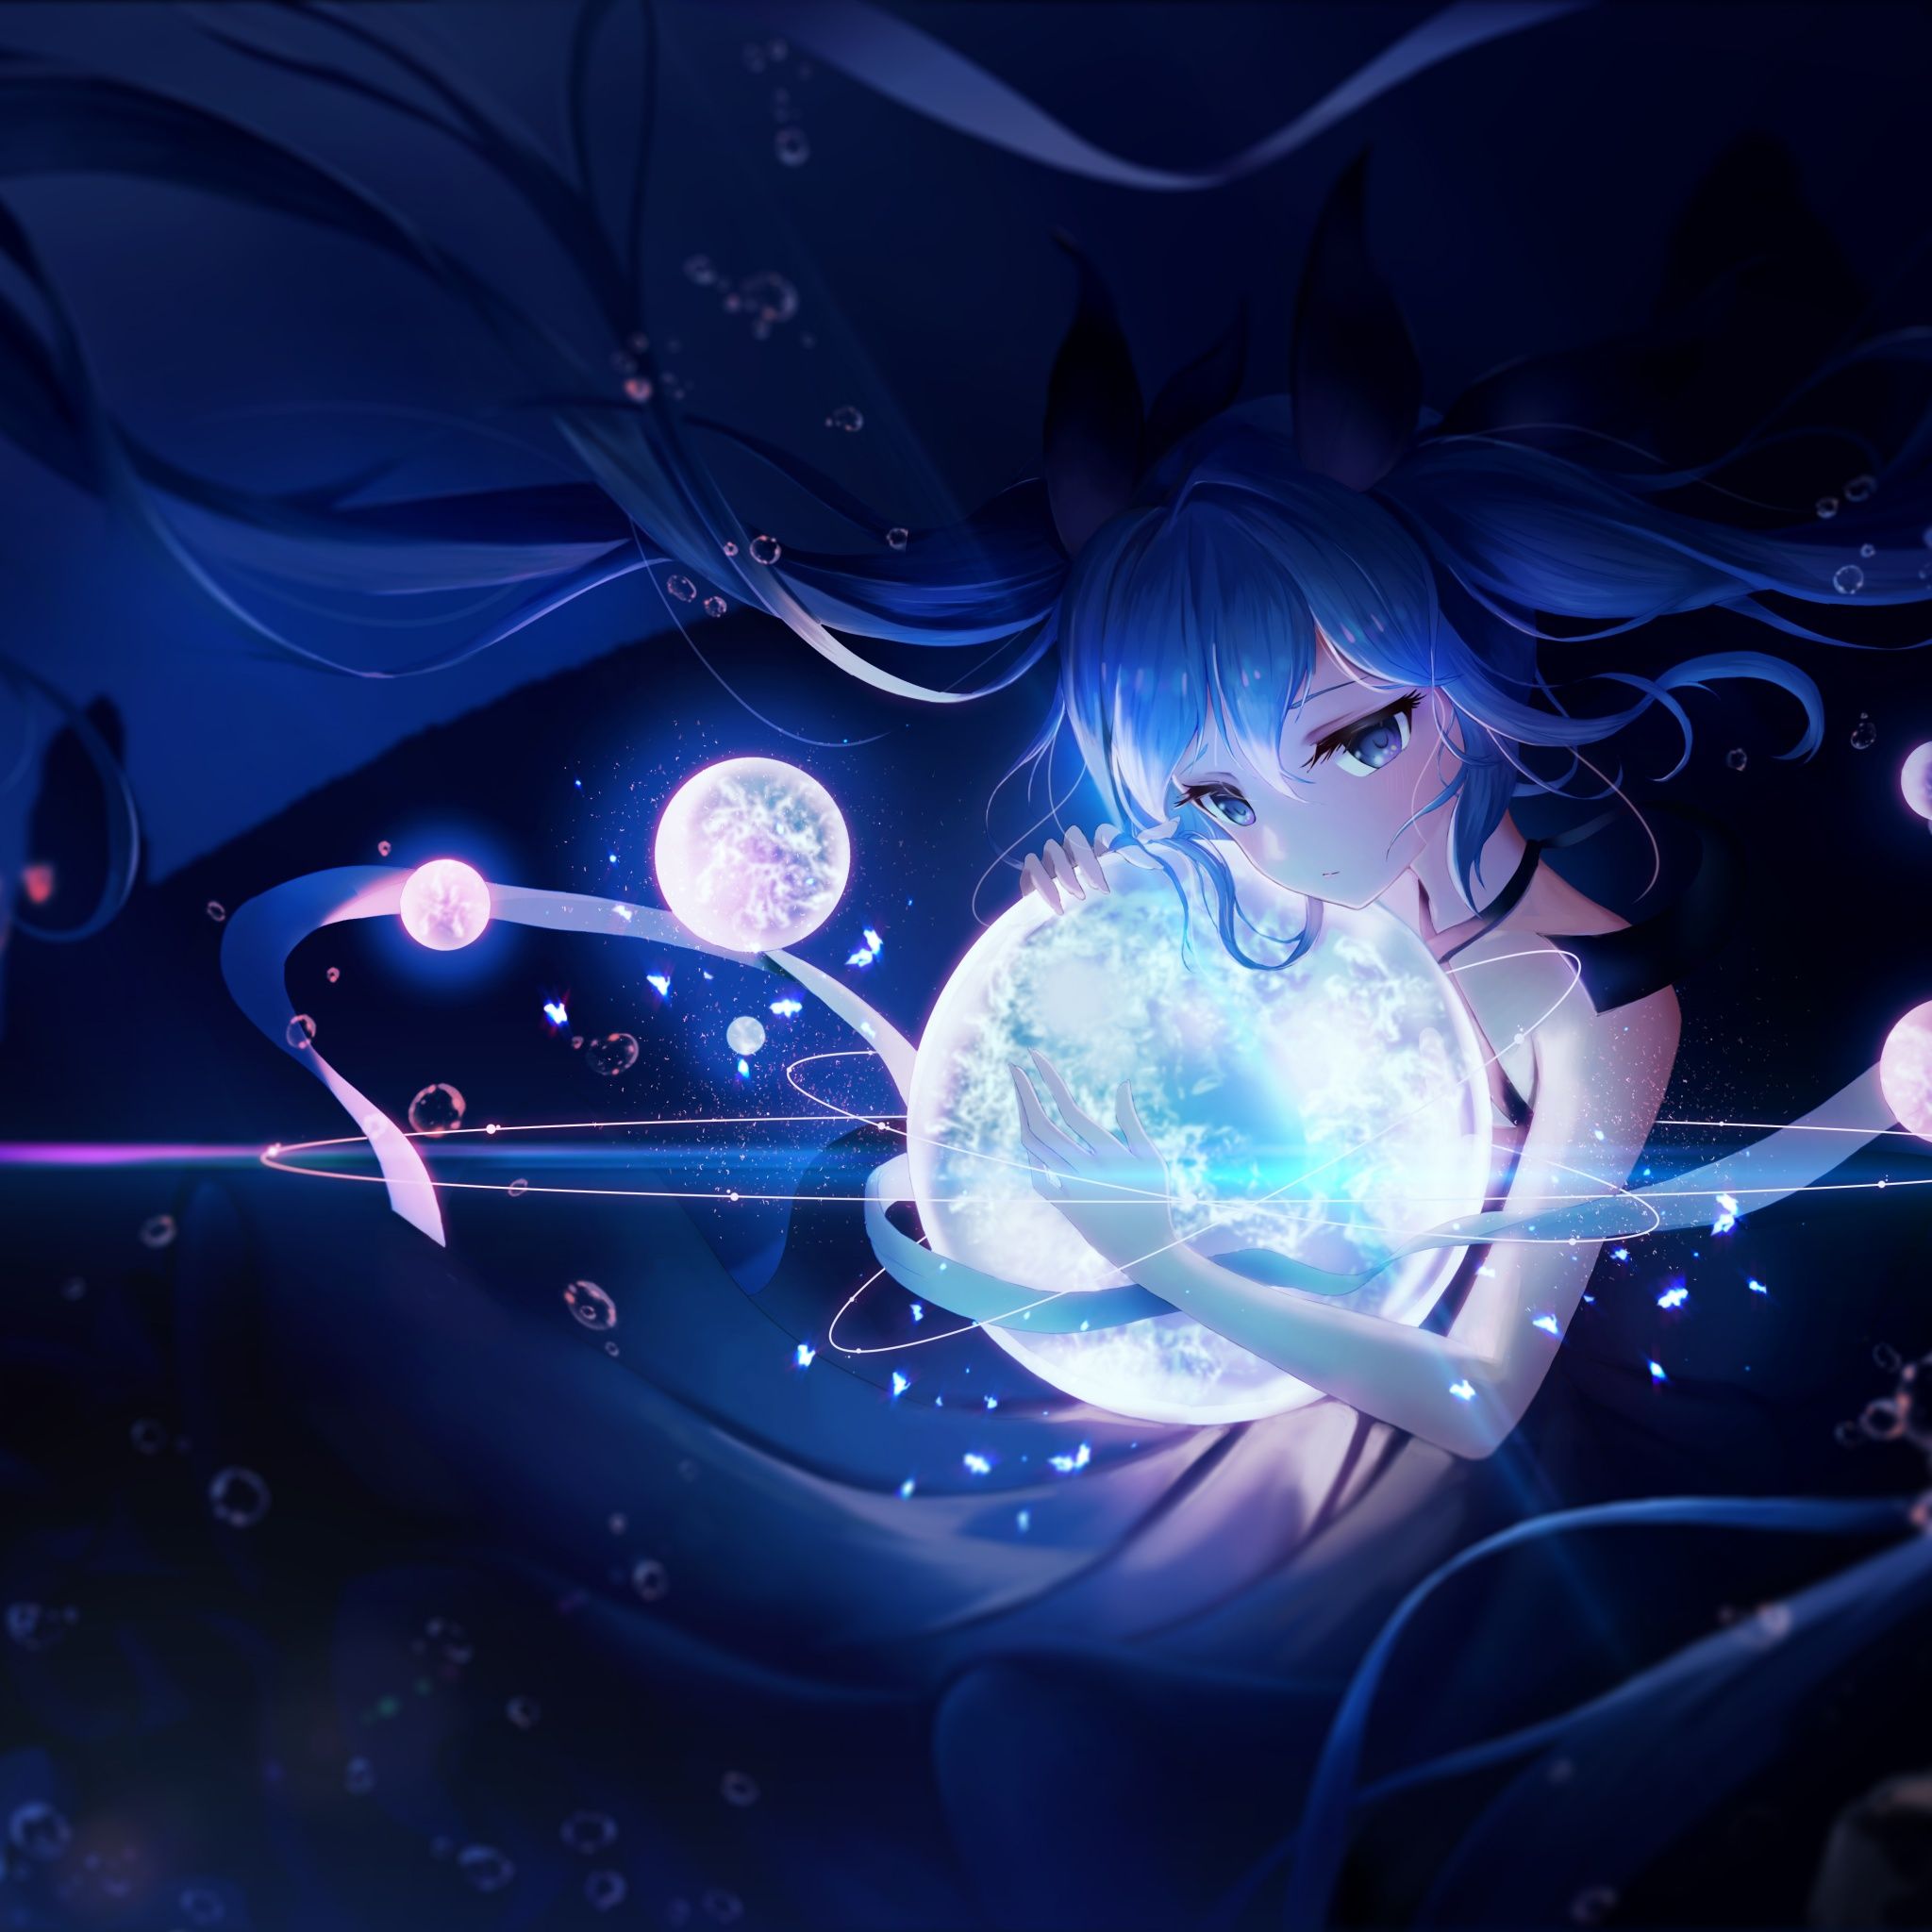 A blue haired anime girl holding a glowing blue orb - Anime girl